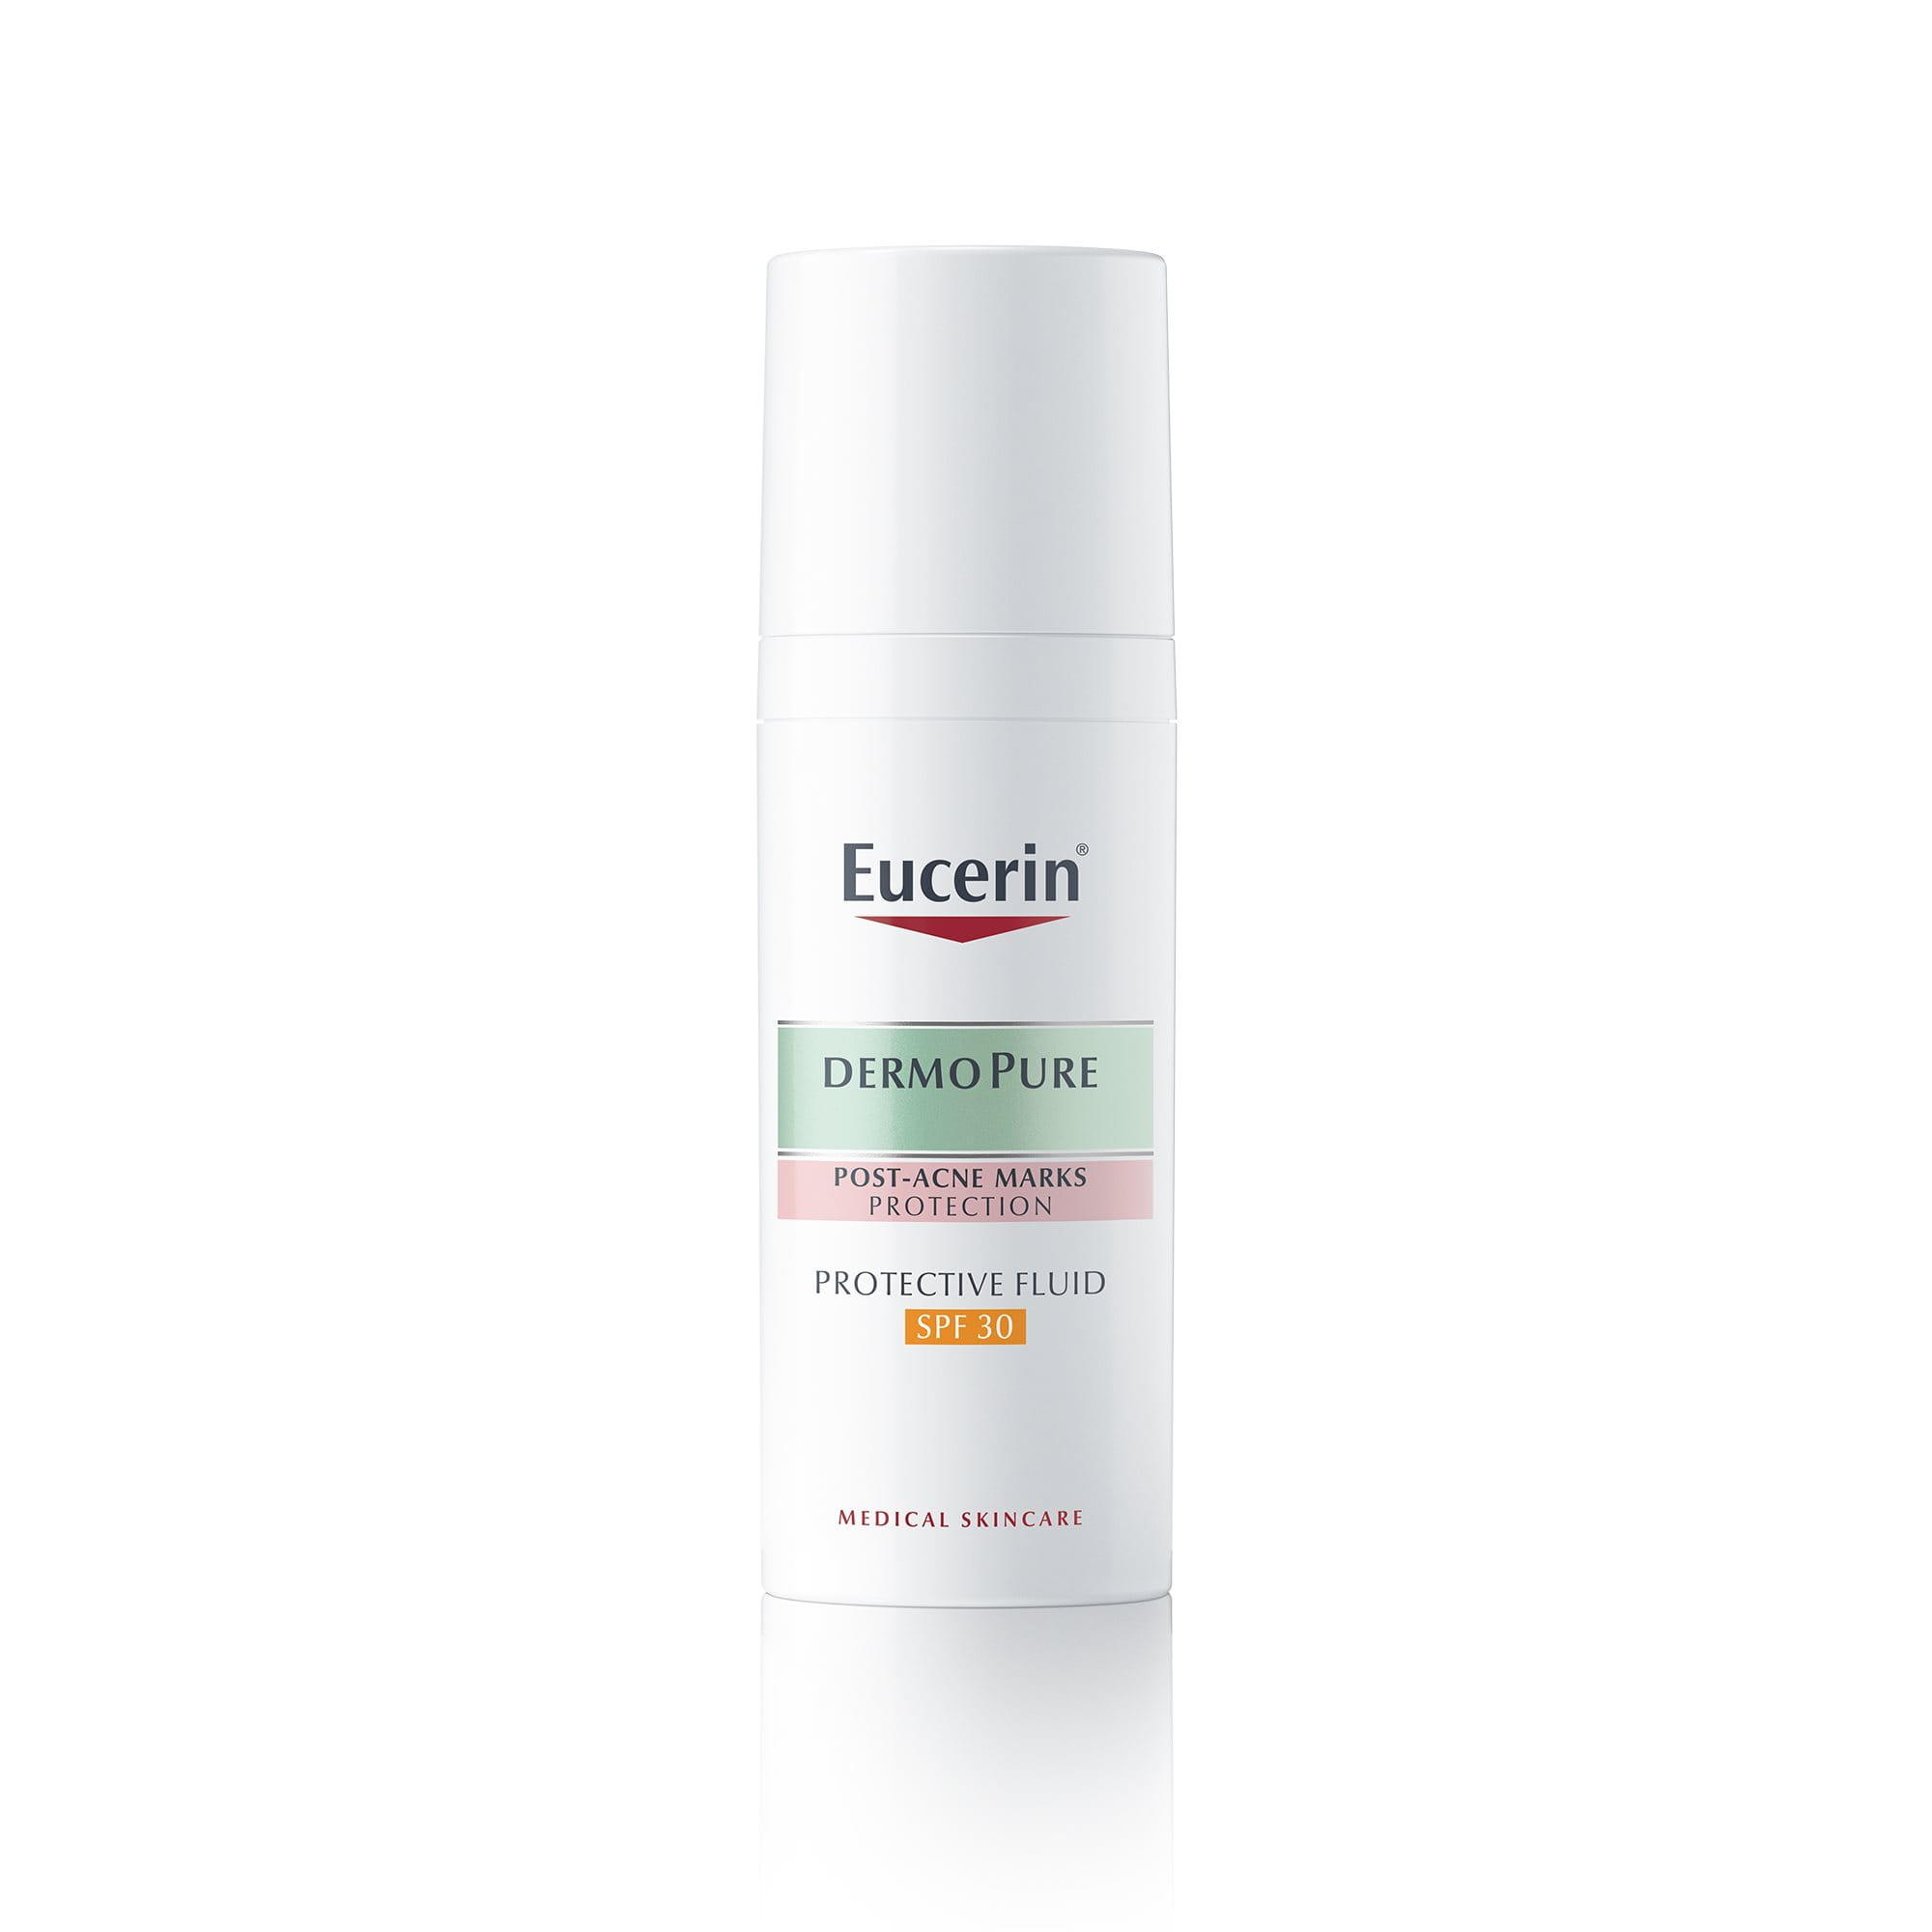 DERMOPURE Protective Fluid SPF 30 | for skin with post-acne marks Eucerin